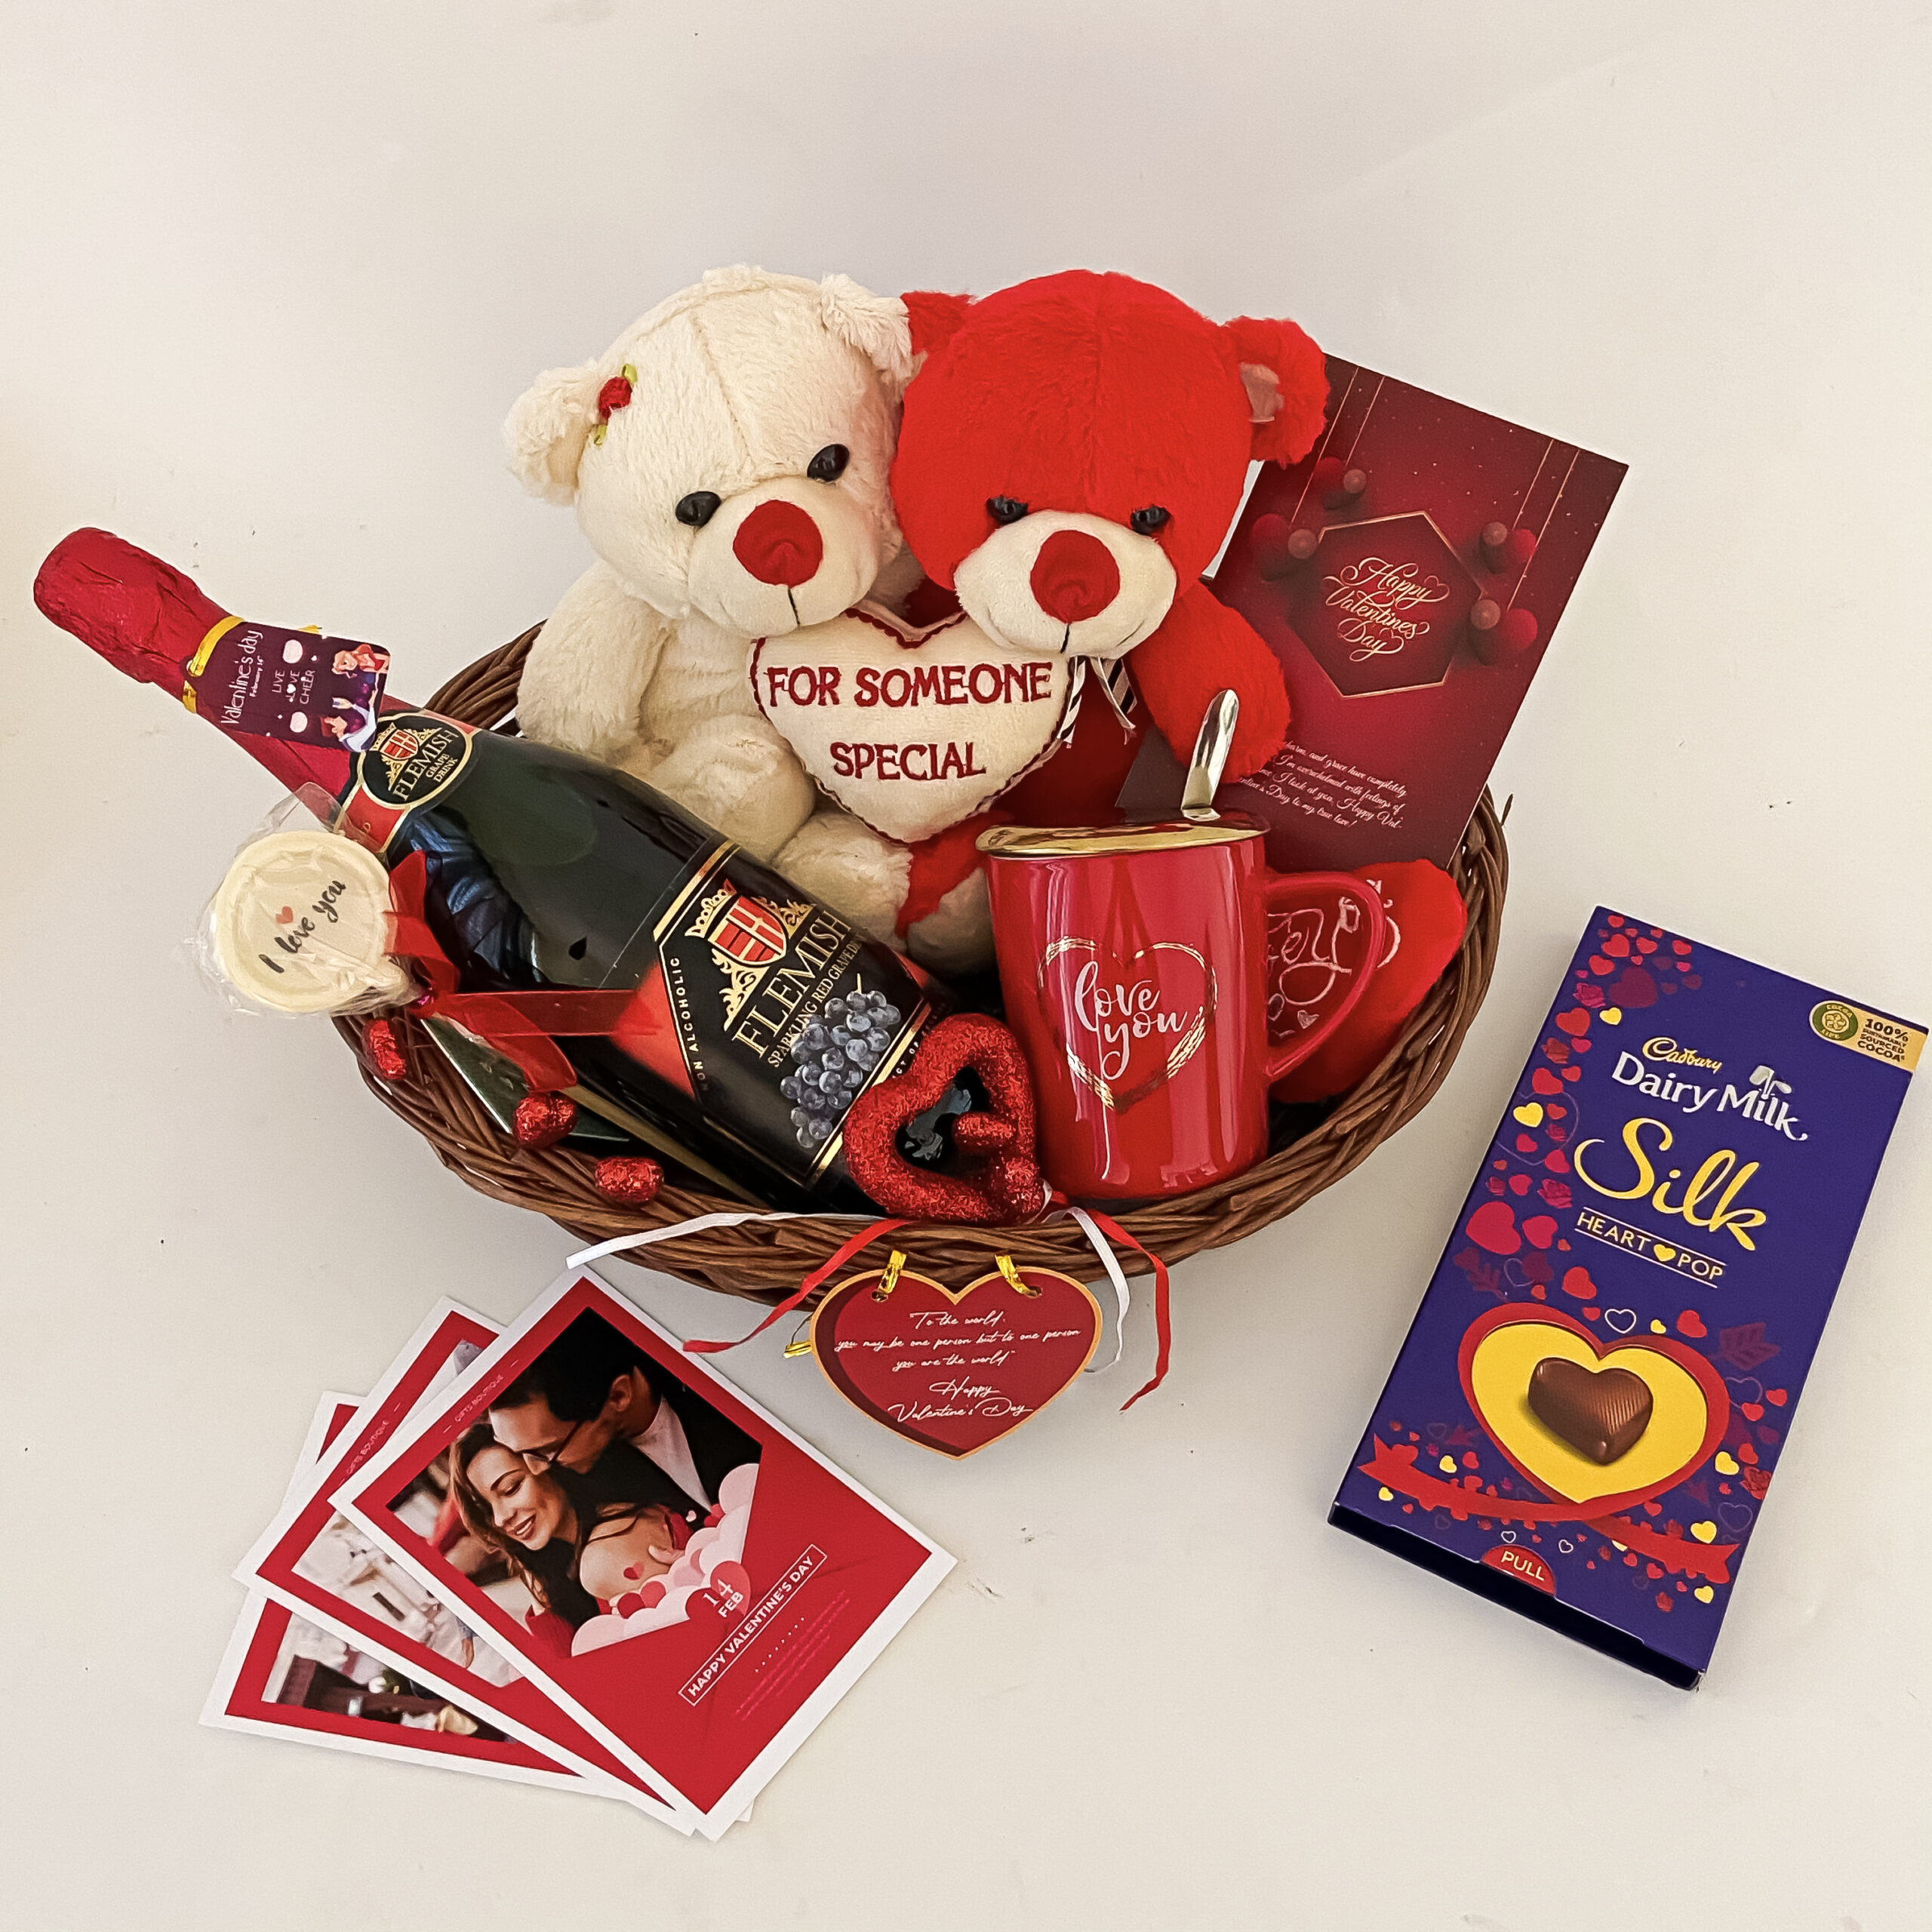 Personalized Gifts Hampers Delivery in Dubai, UAE | Customize Gift Hamper